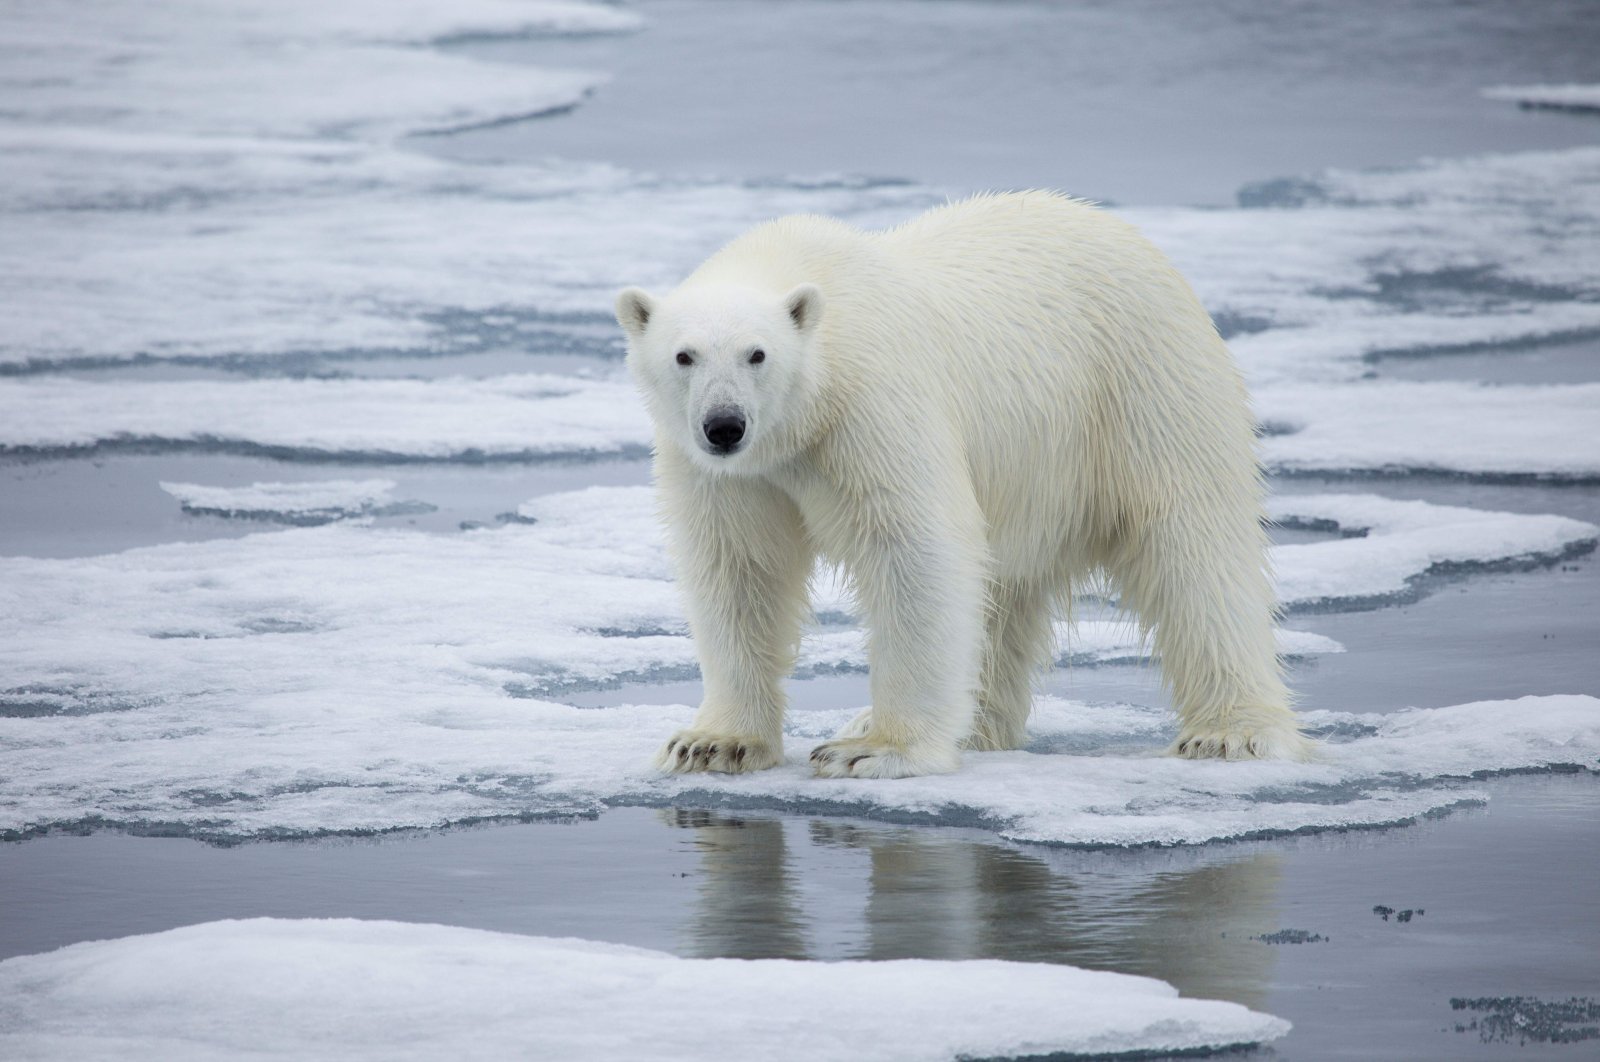 A handout photo made available on July 17, 2020 by Polar Bears International shows a polar bear standing on melting sea ice in Svalbard, Norway, in 2013. (AFP Photo)